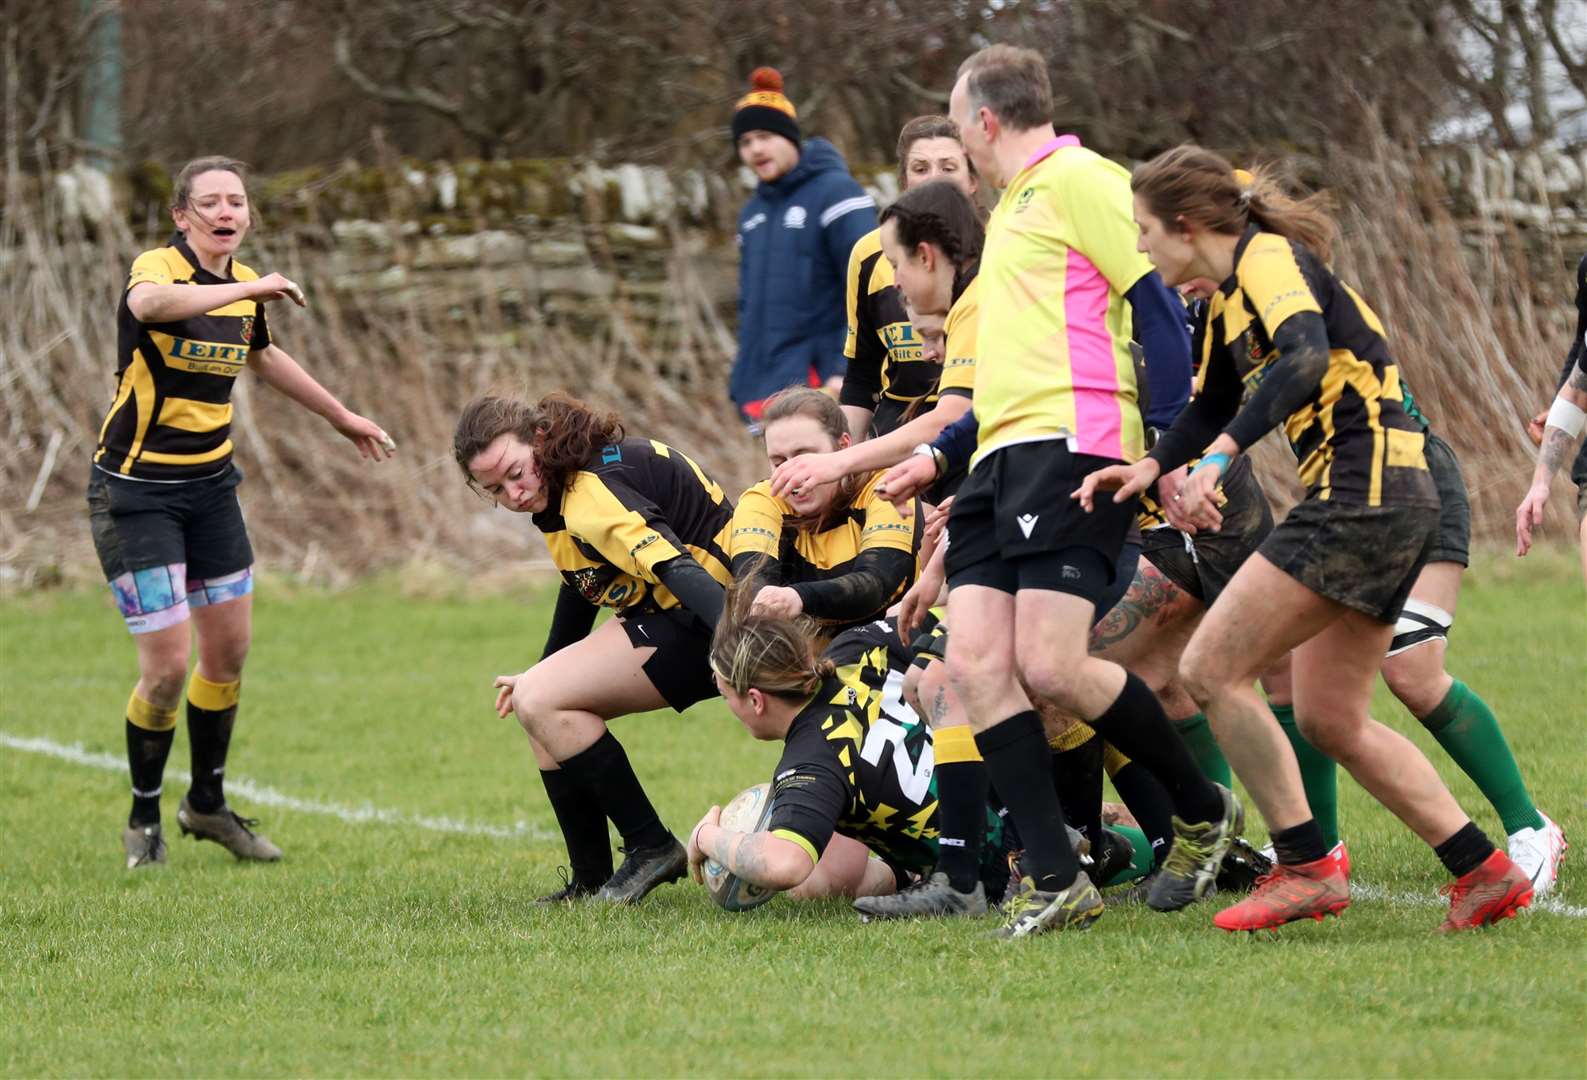 Emmy Smith scores a try despite being surrounded by Lochaber opponents. Picture: James Gunn